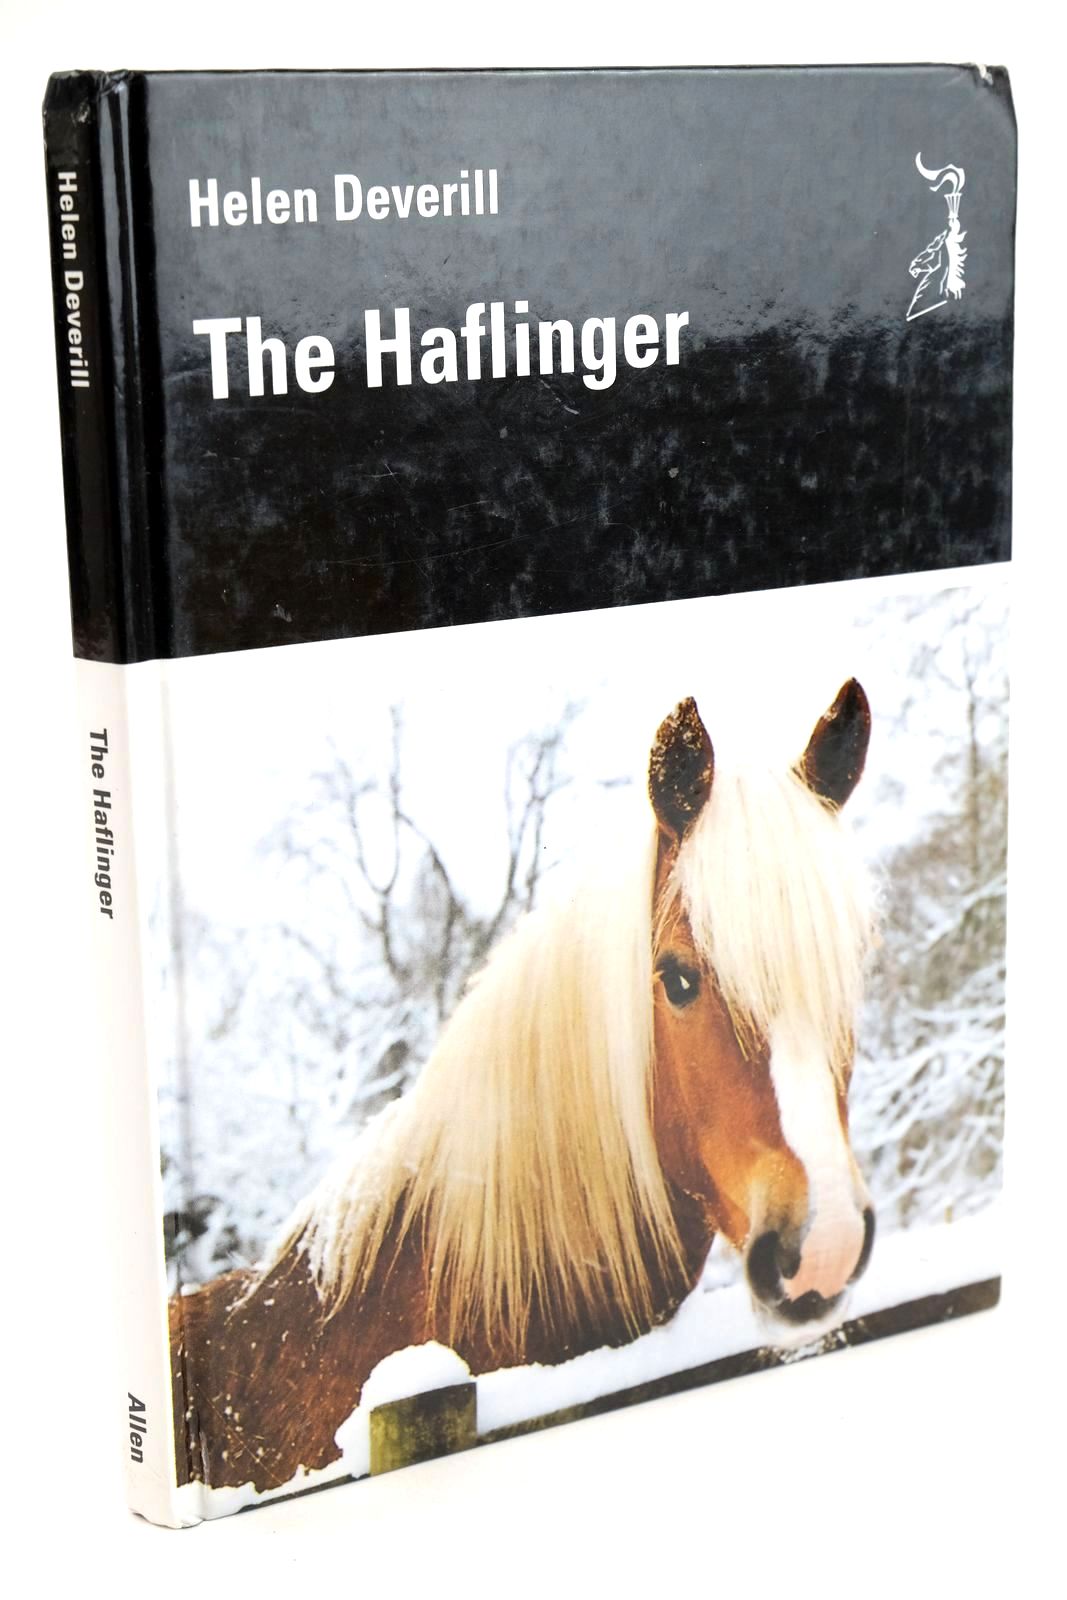 Photo of THE HAFLINGER written by Deverill, Helen published by J.A. Allen &amp; Co. Ltd. (STOCK CODE: 1324006)  for sale by Stella & Rose's Books